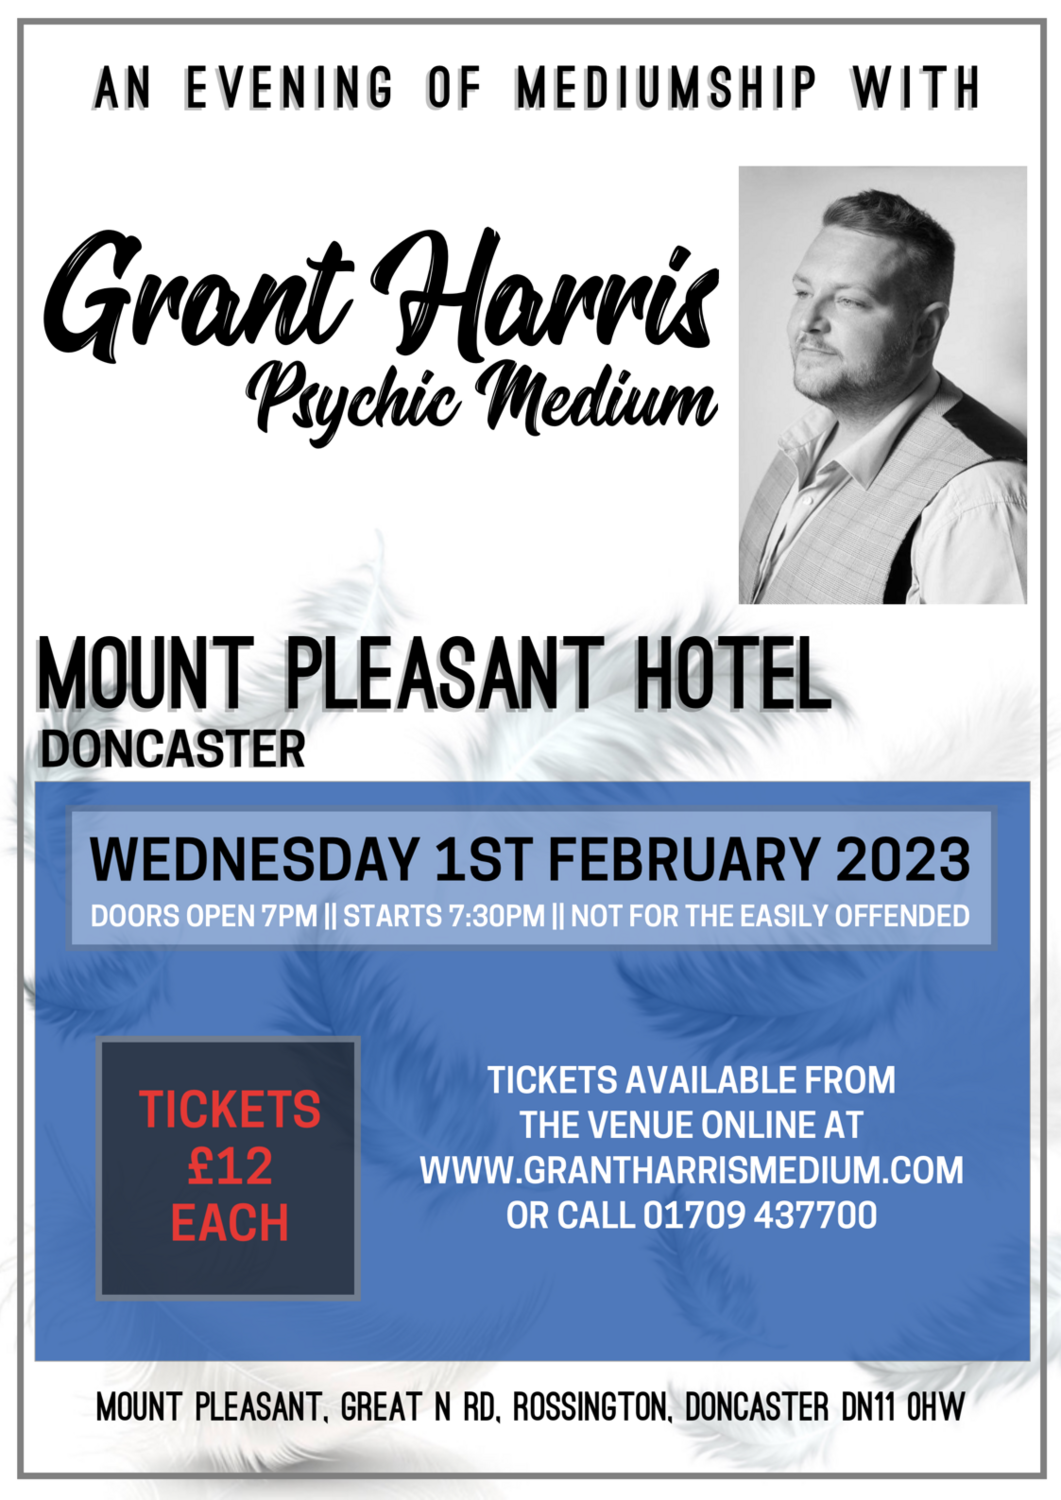 Mount Pleasant Hotel, Doncaster, Wednesday 1st February 2023